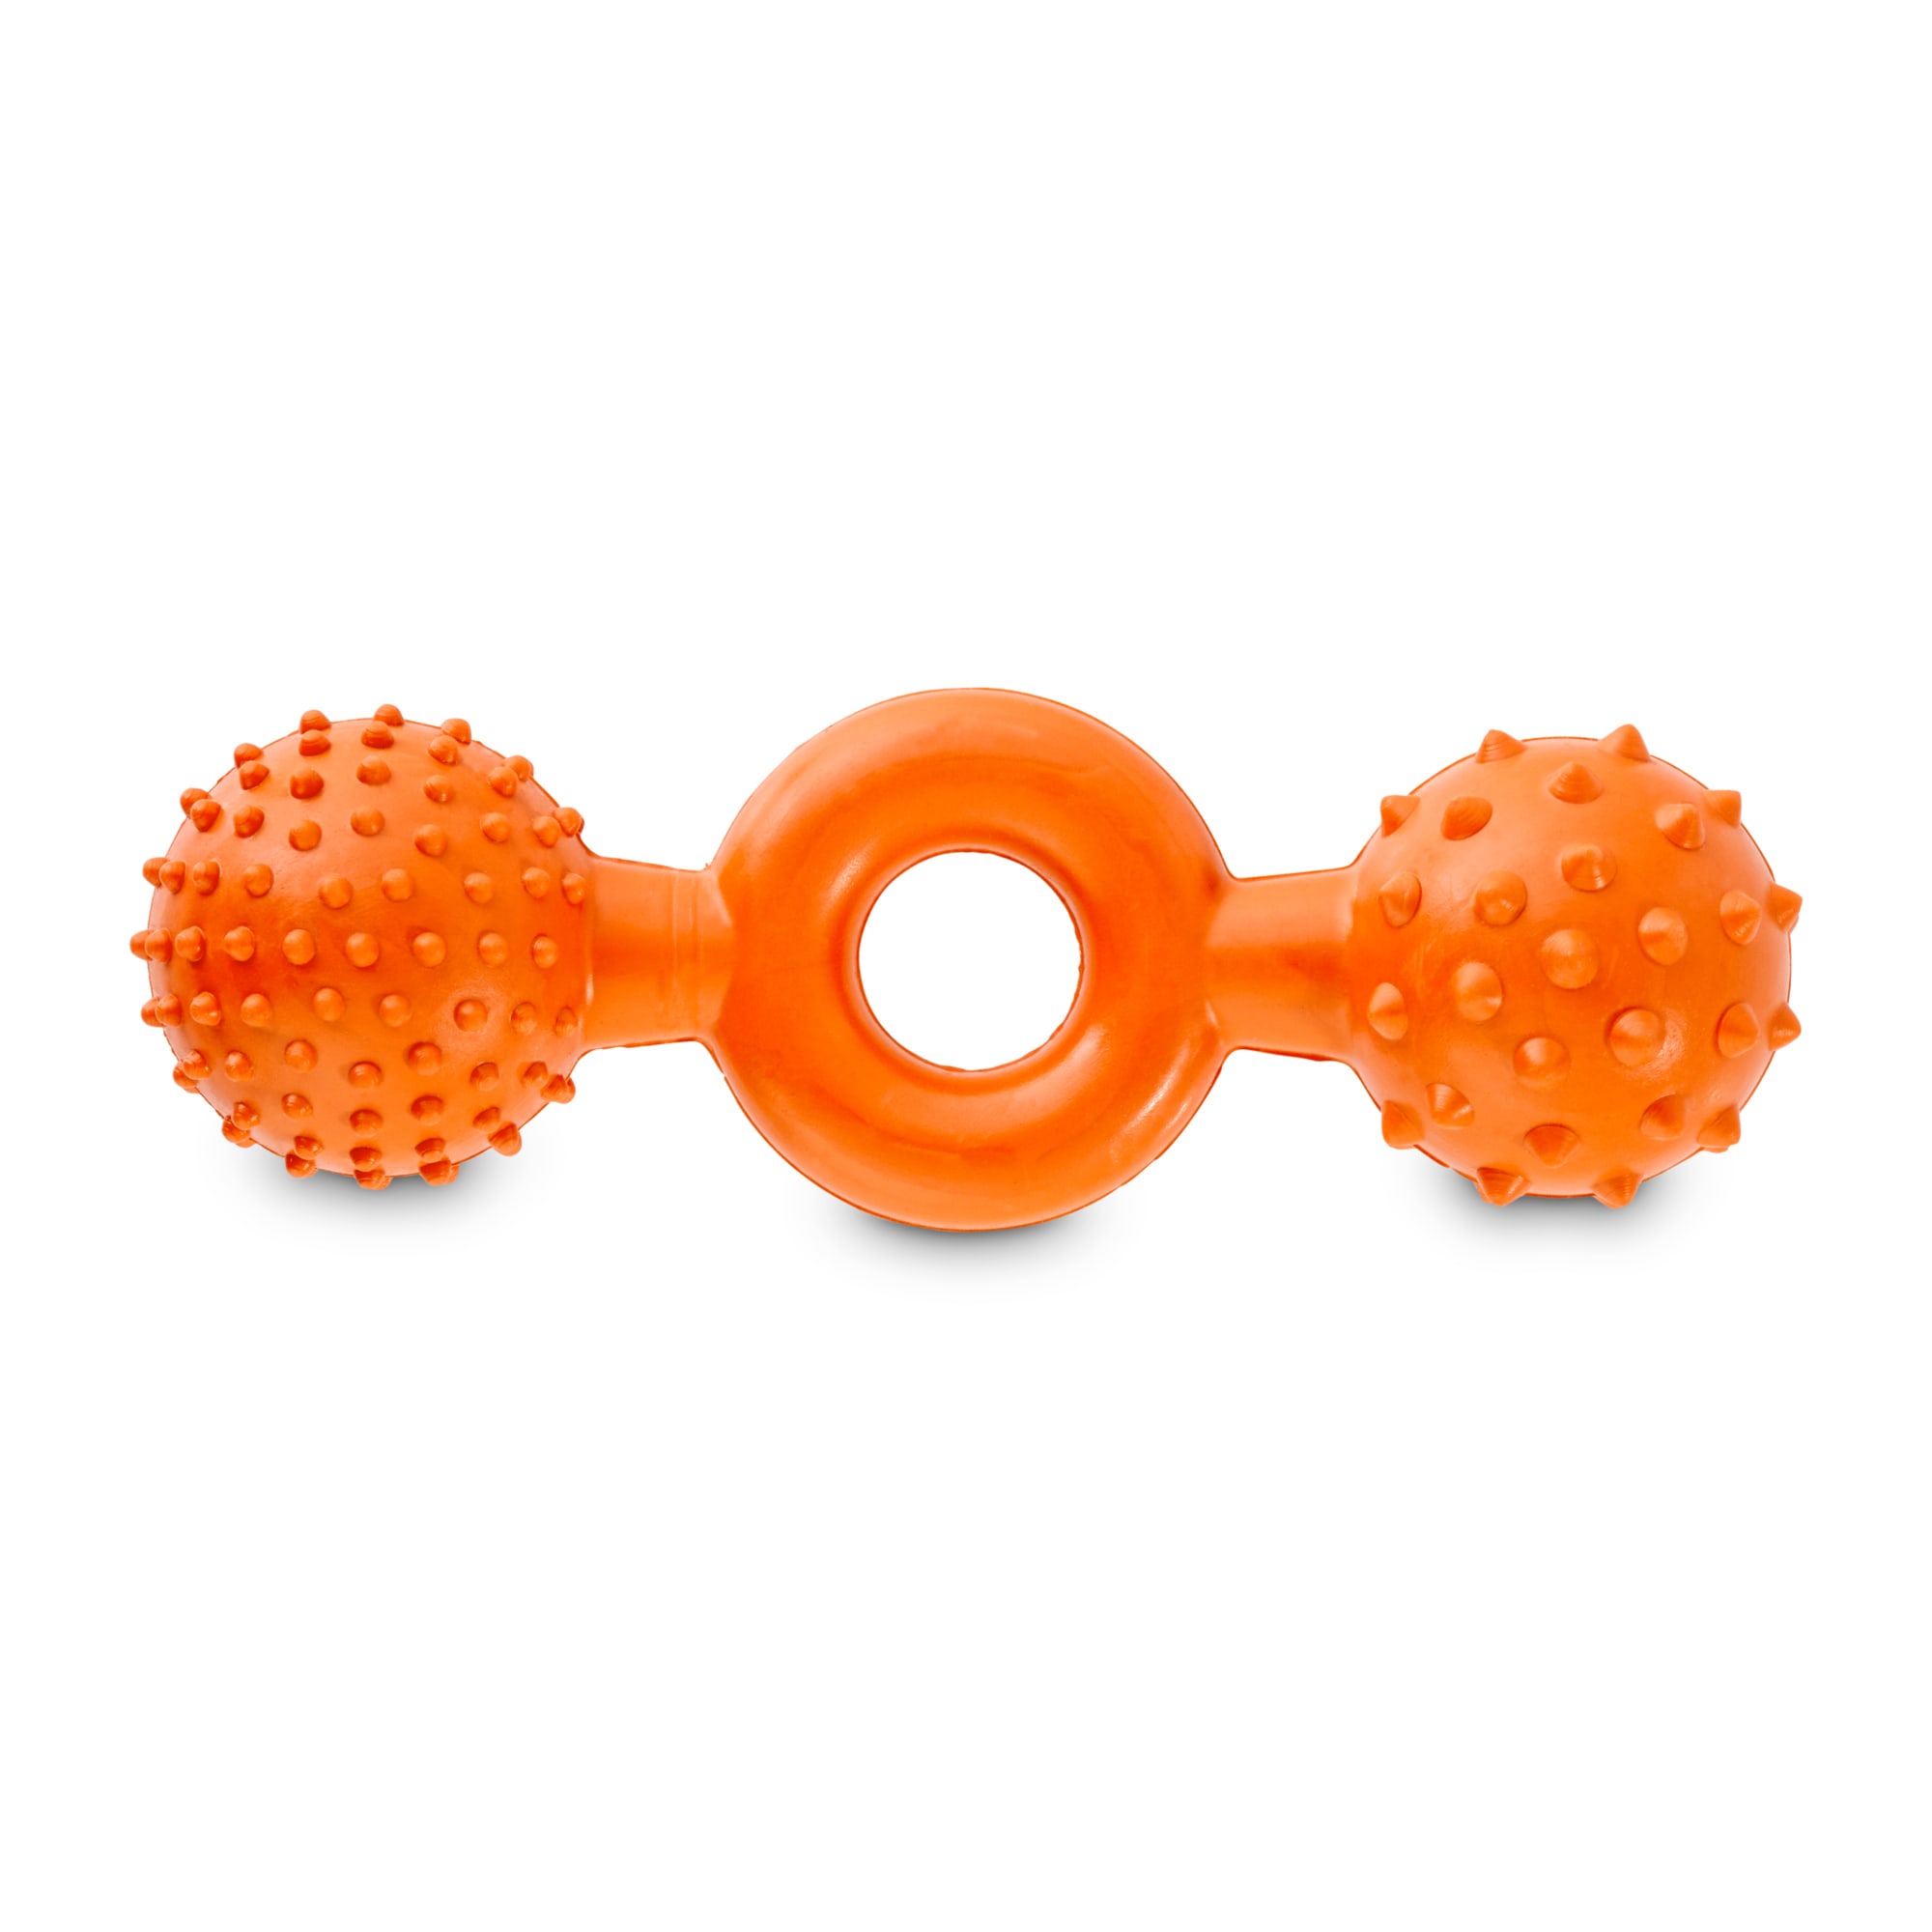 DISSKNIC Indestructible Squeaky Dog Balls Puppy Toys, Interactive Dog Toys  for Small Dogs, Puppy Chew Toys for Teething and Relax, Dog Chew Toy Balls